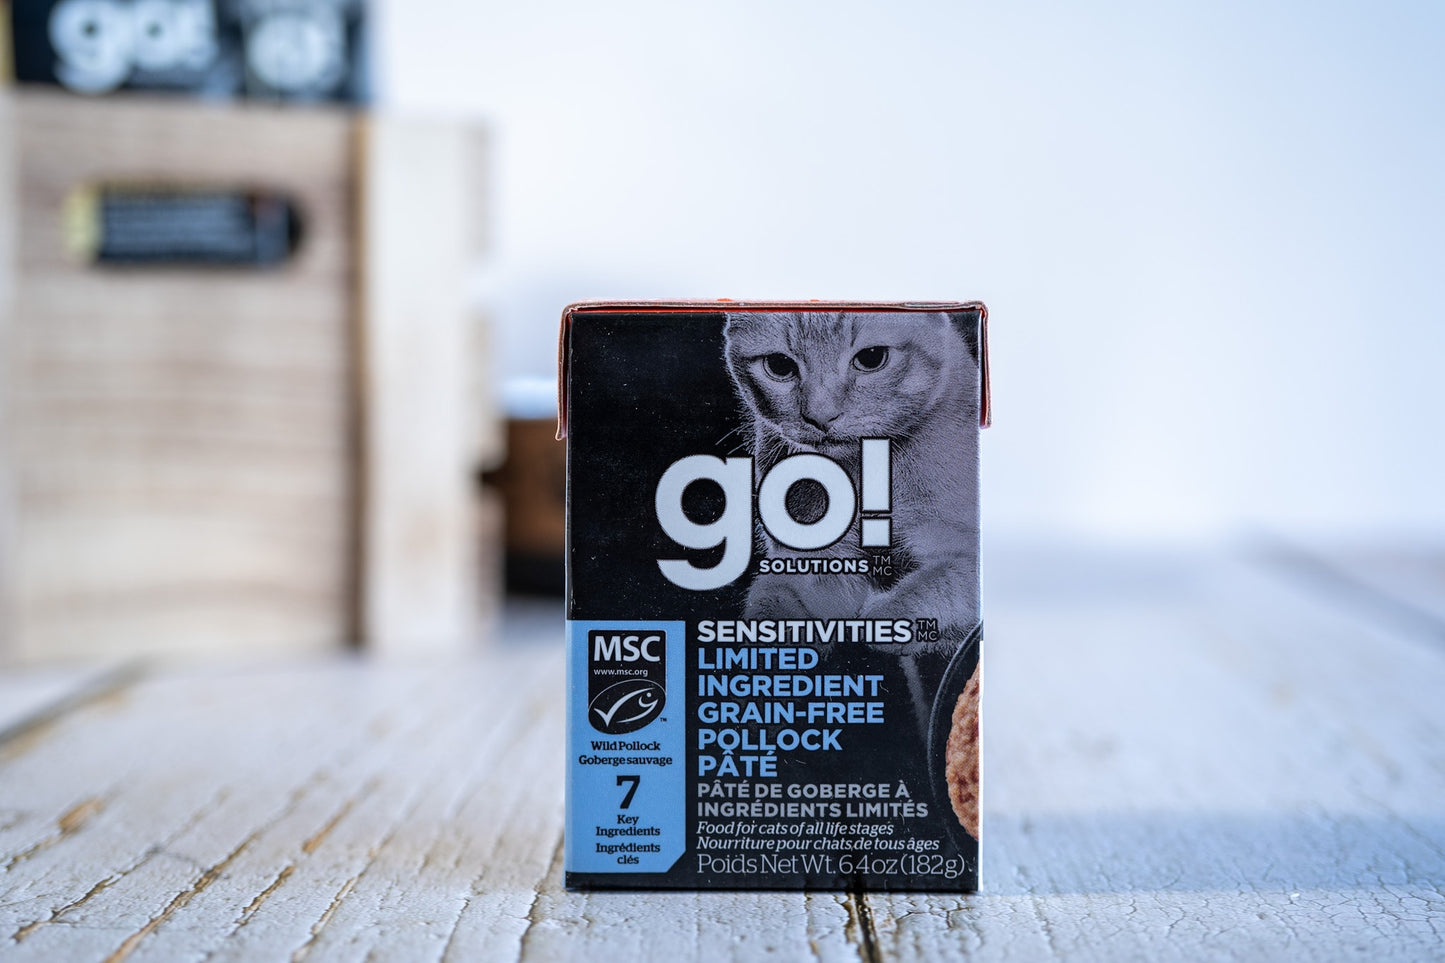 Grain-free pollock pâté for cats of all life stages from Go Solutions!